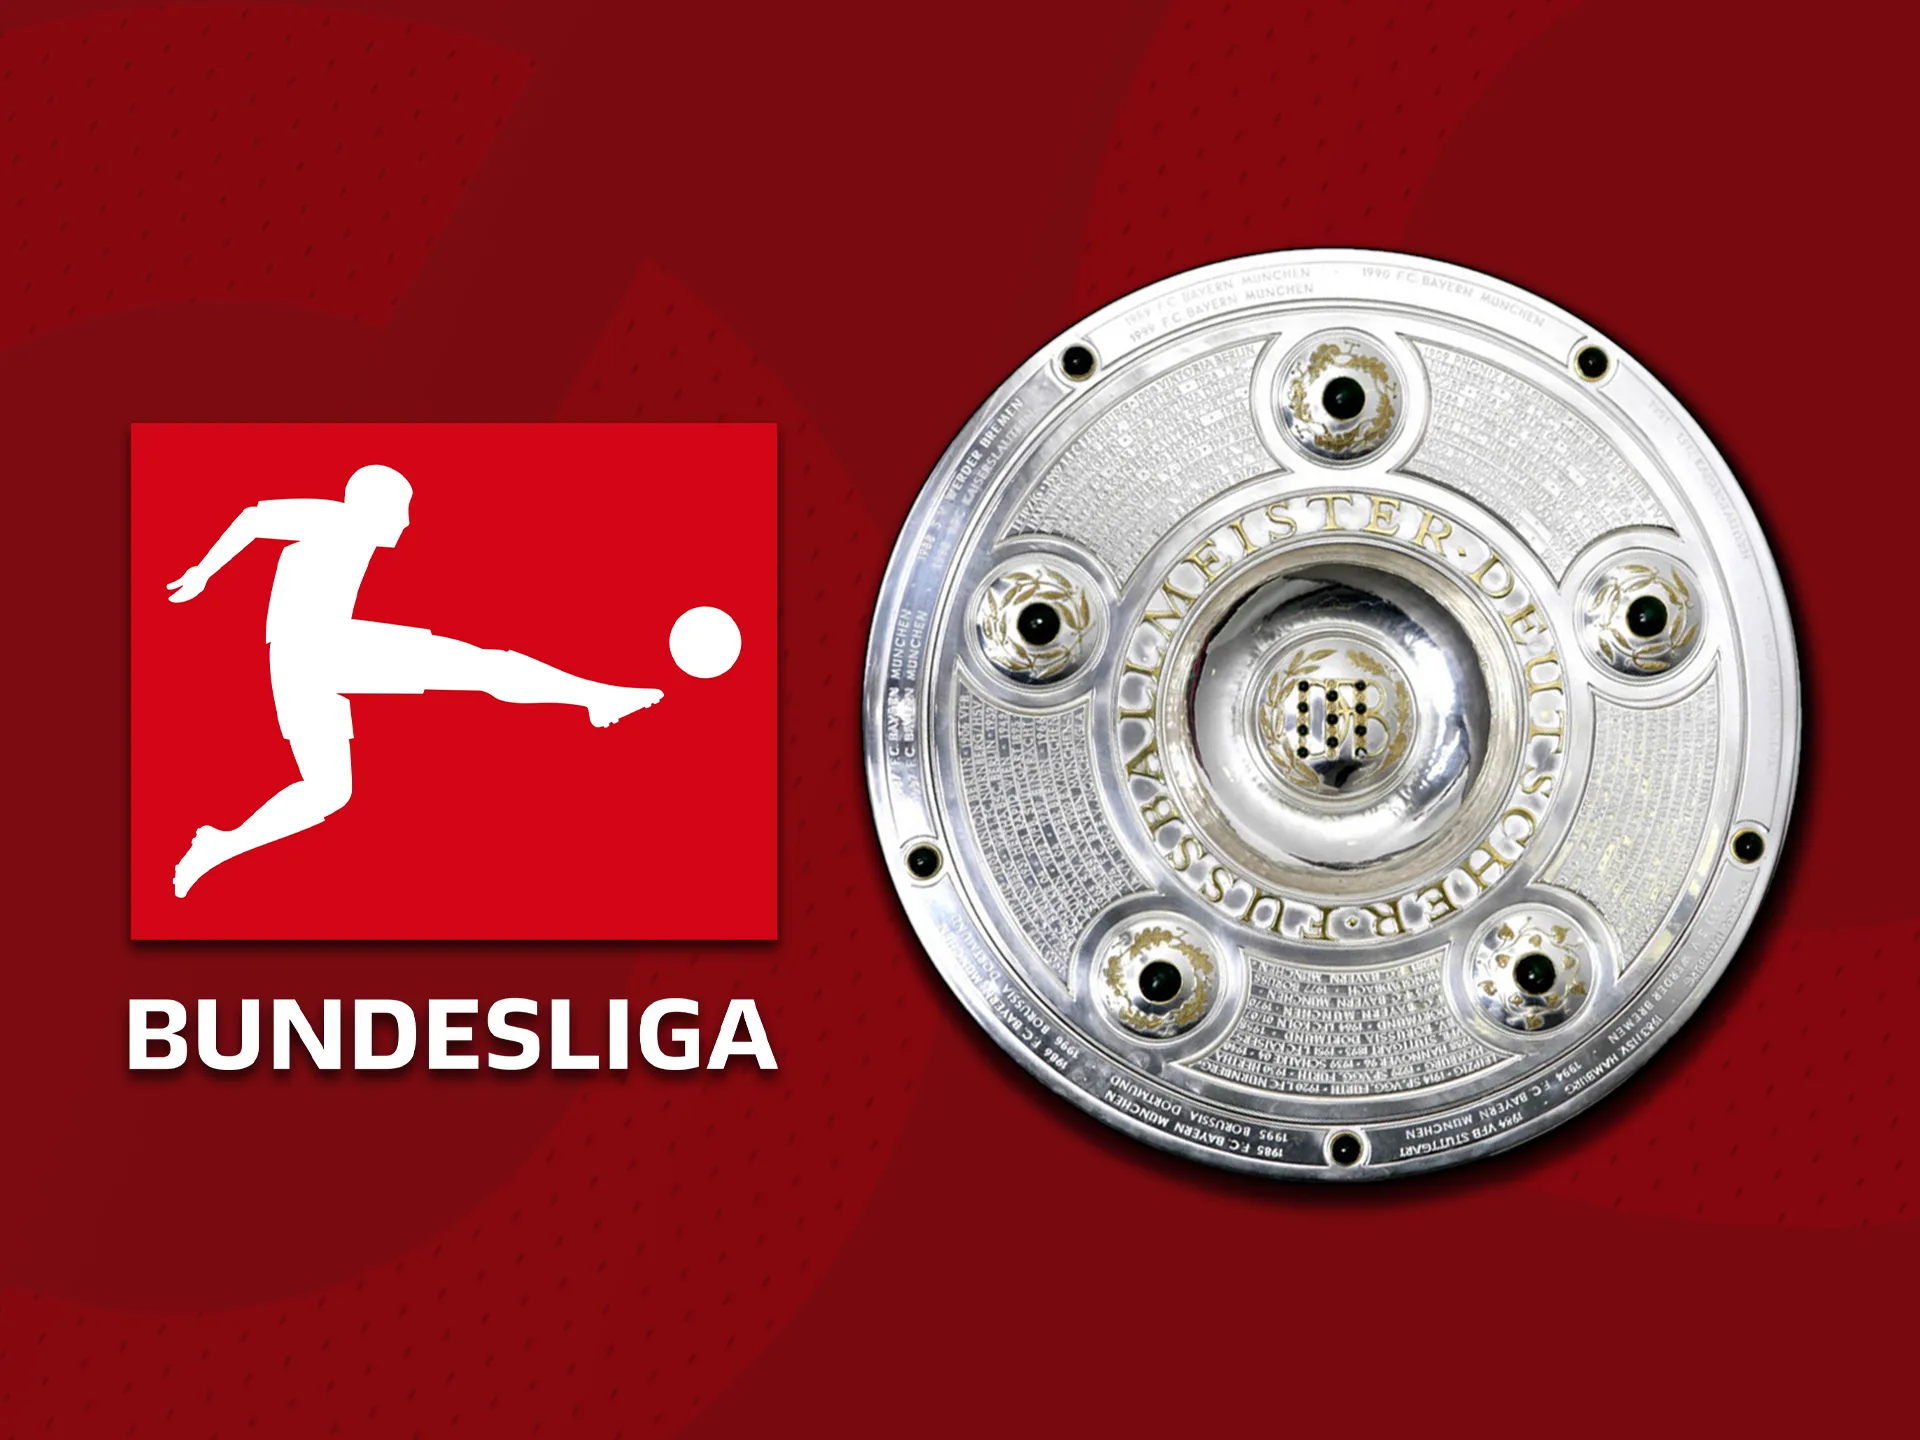 There is a wave of new interest in the Bundesliga football event among Indian bettors.